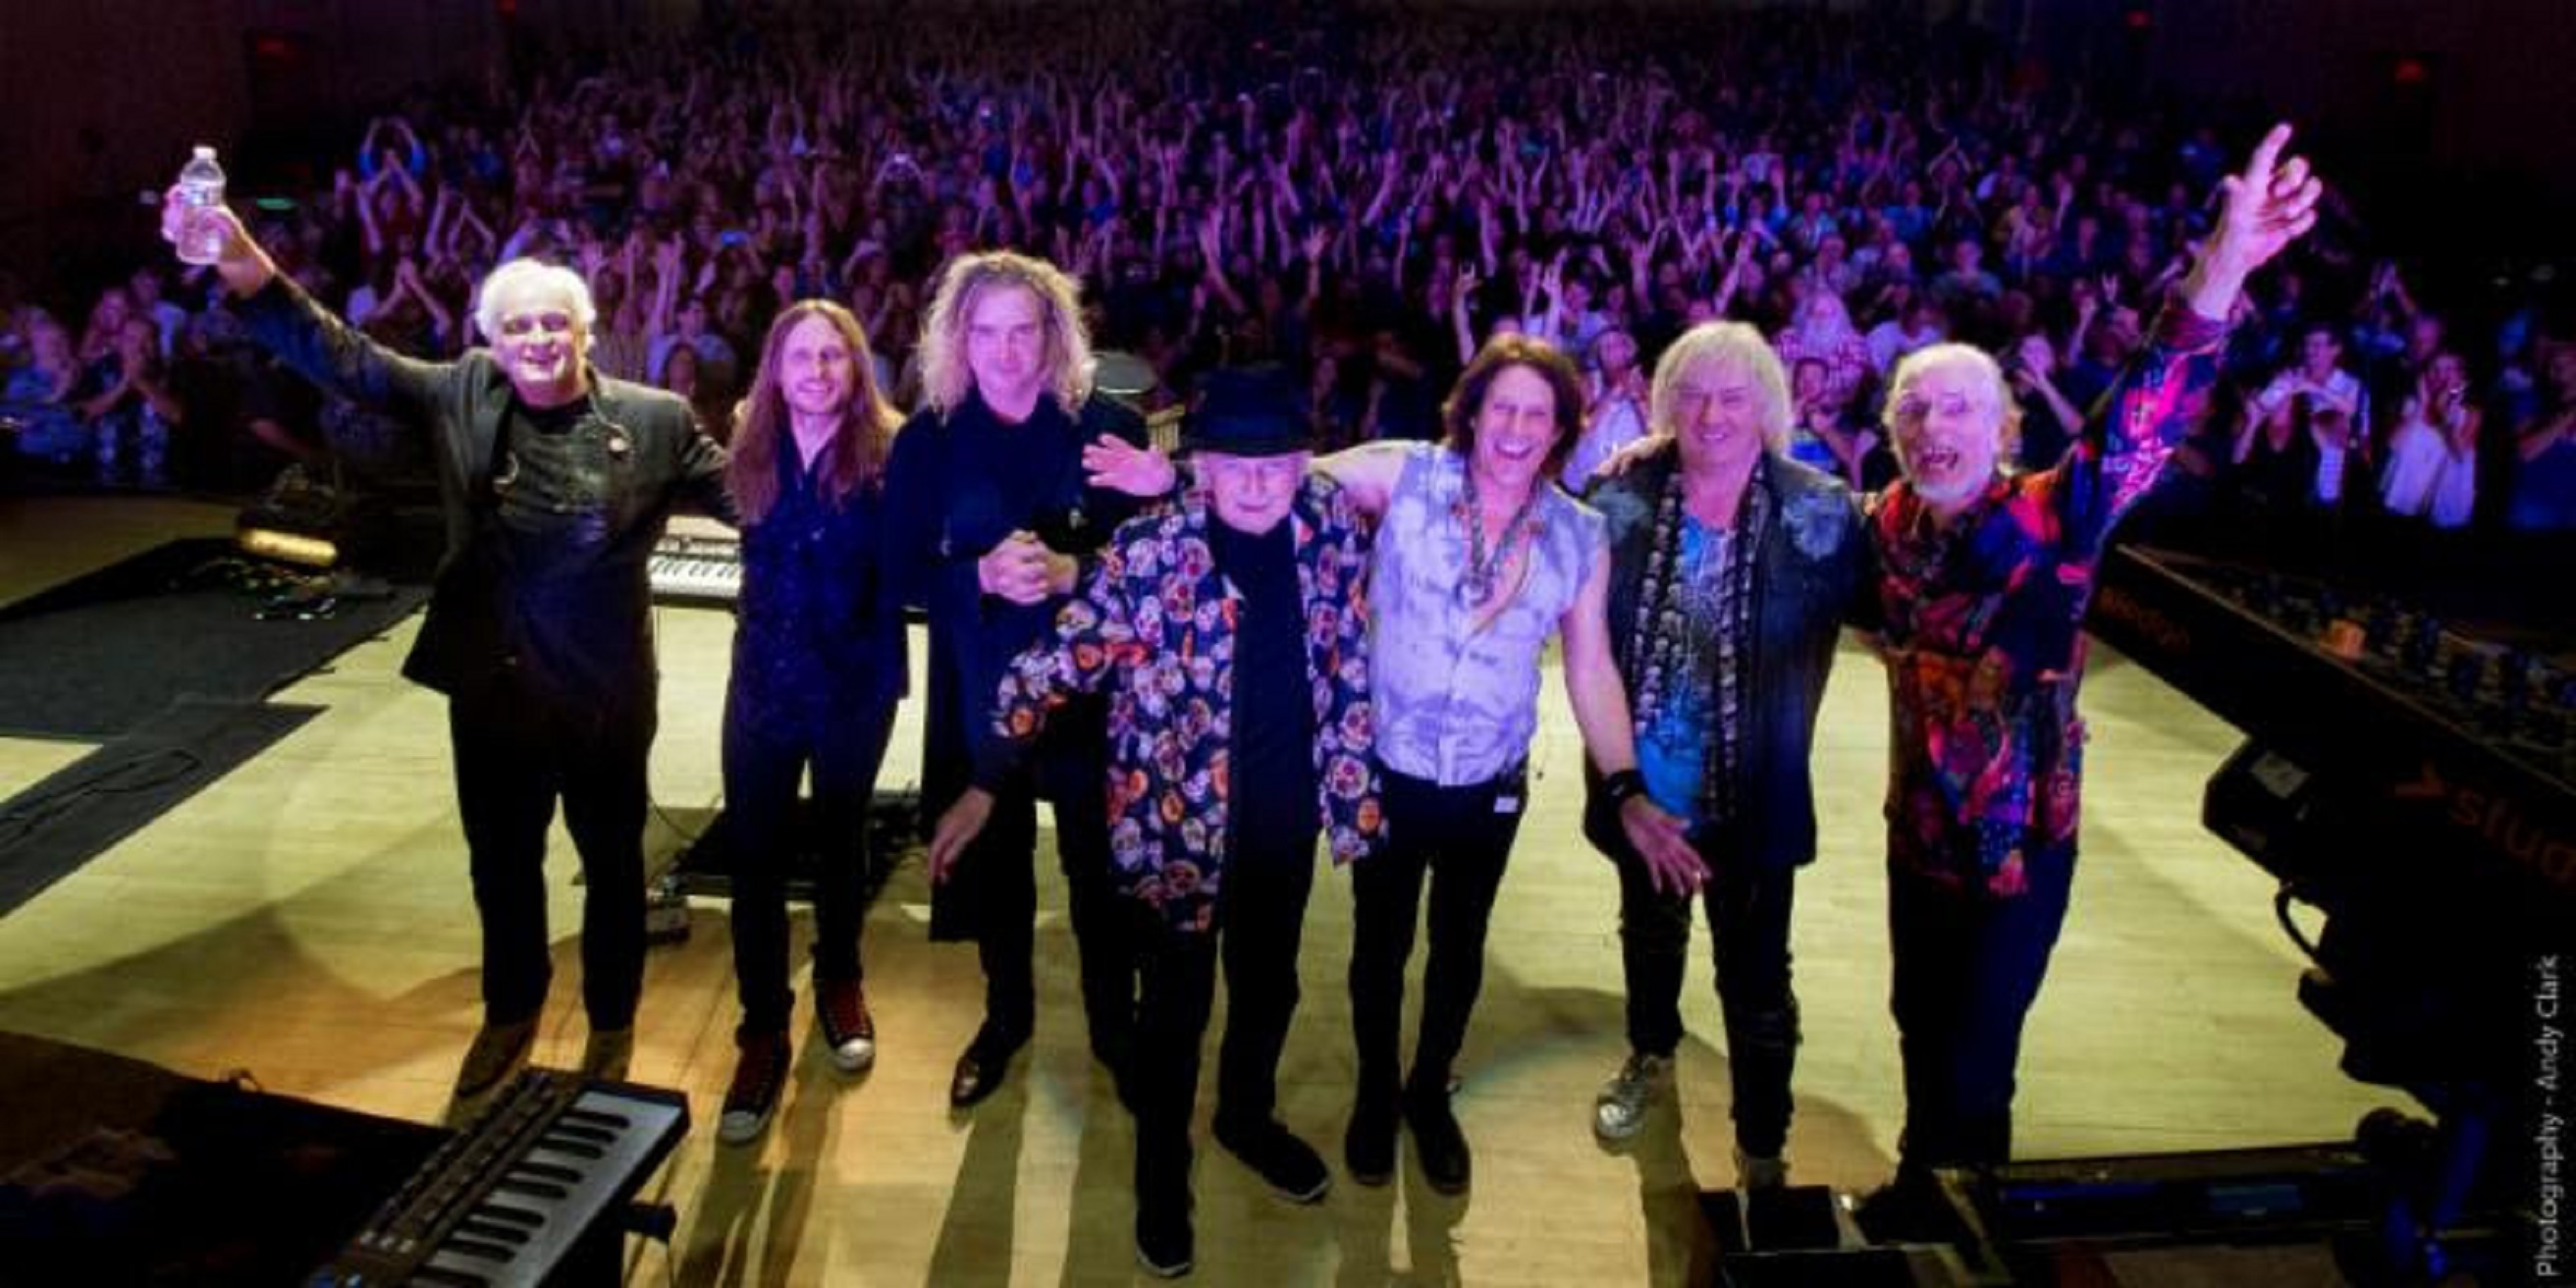 YES Wrap 35Date Triumphant North American 50th Anniversary Tour